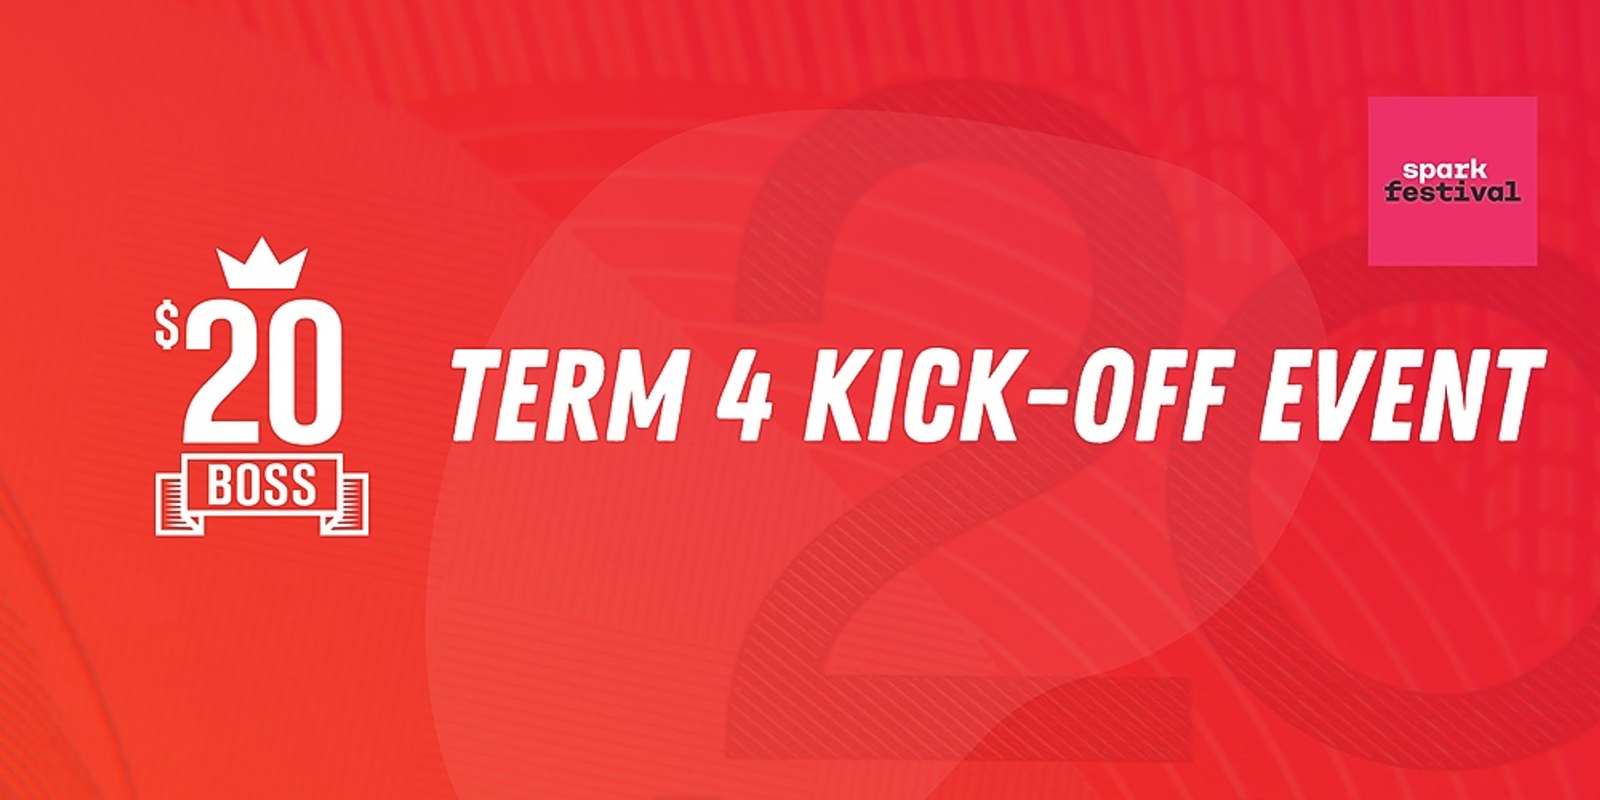 Banner image for $20 Boss Term 4 Kick-Off Event